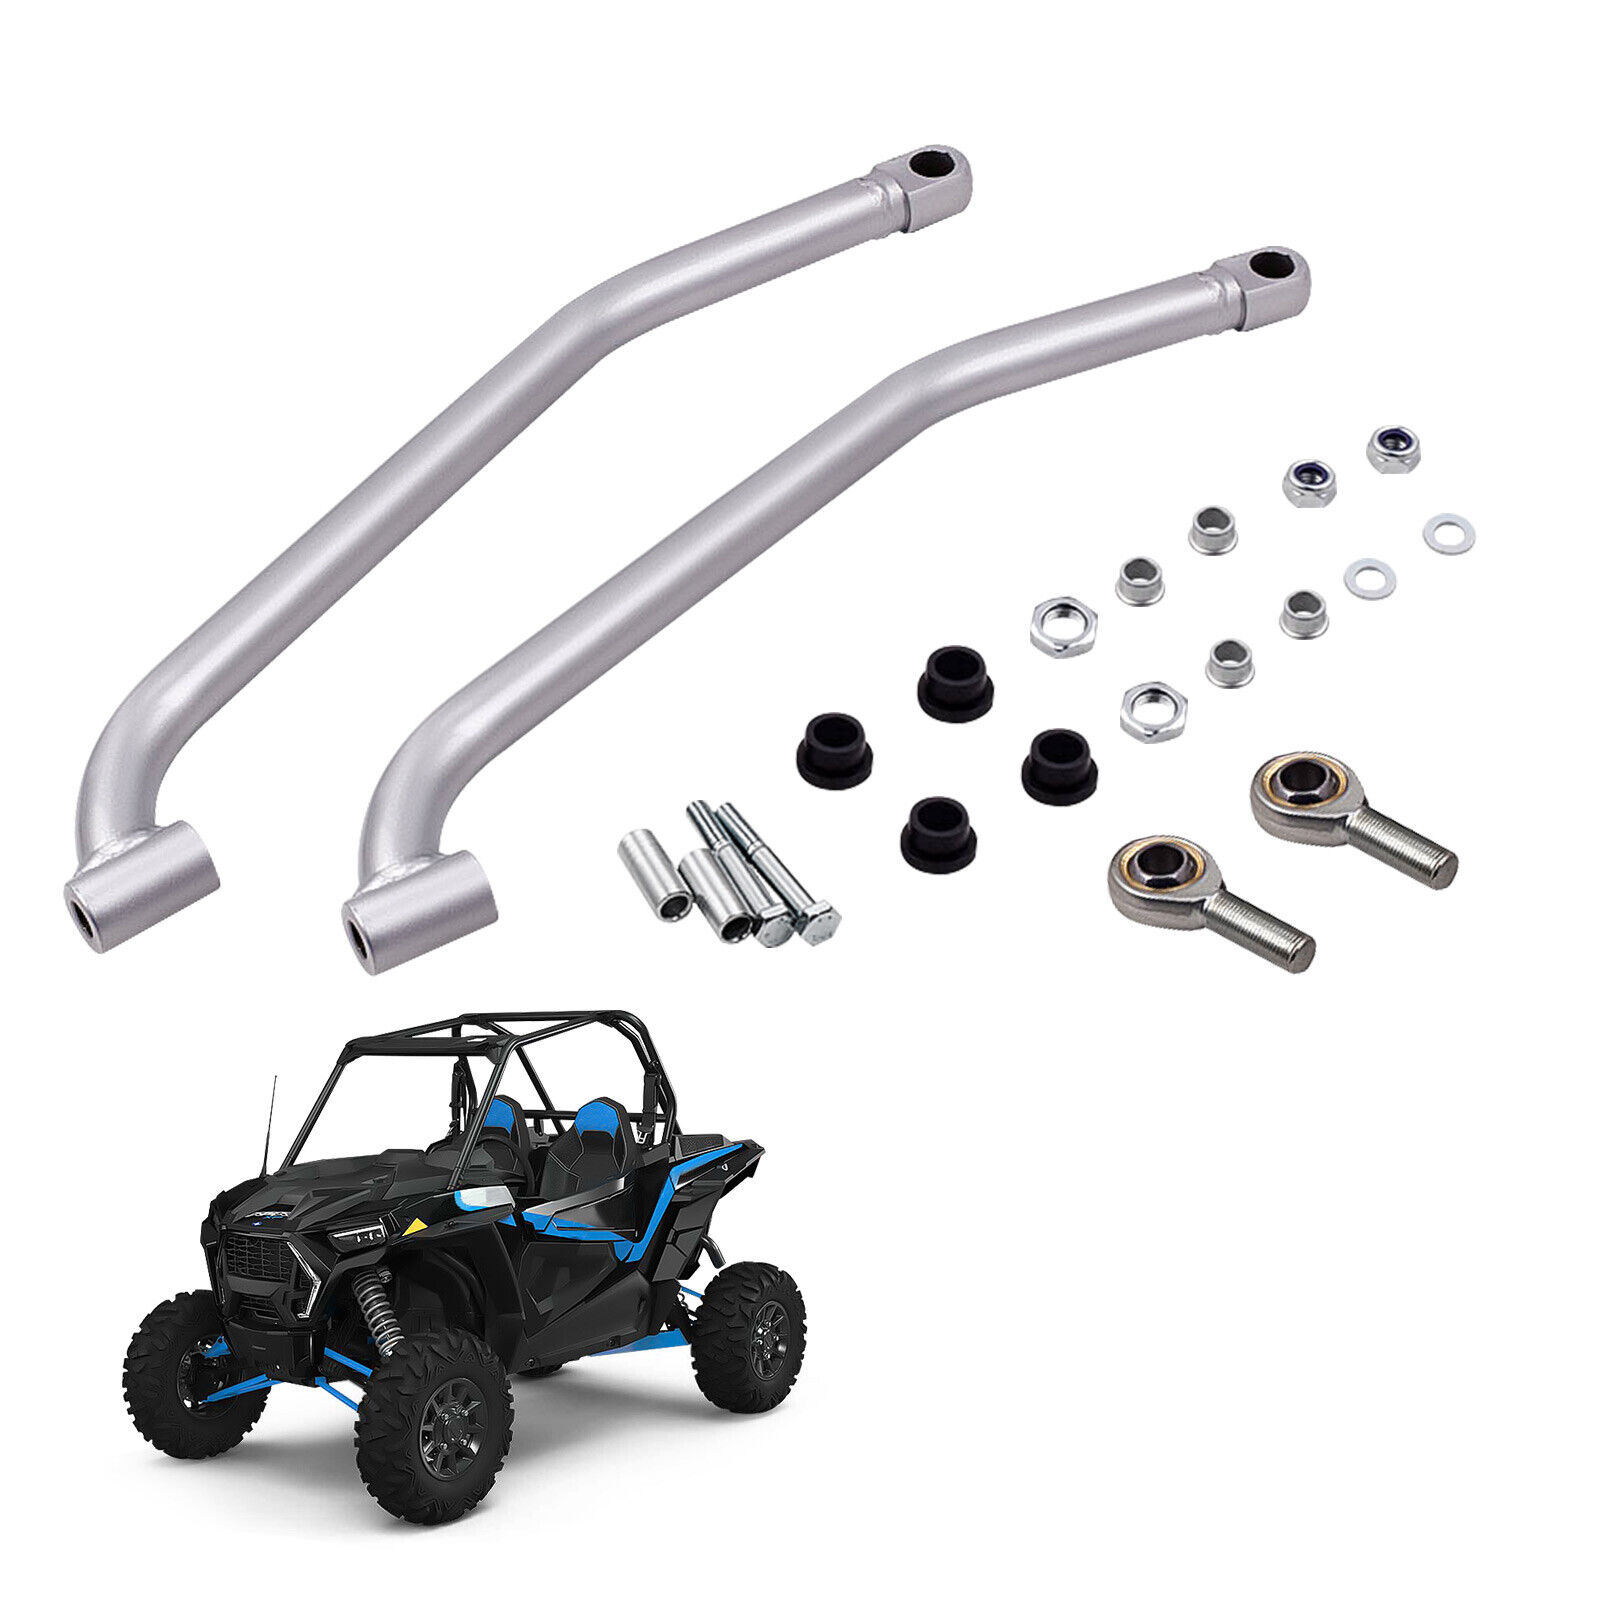 Rear Lower Radius Bars for 2014-2017 Polaris RZR XP 1000 Rods High Max Clearance